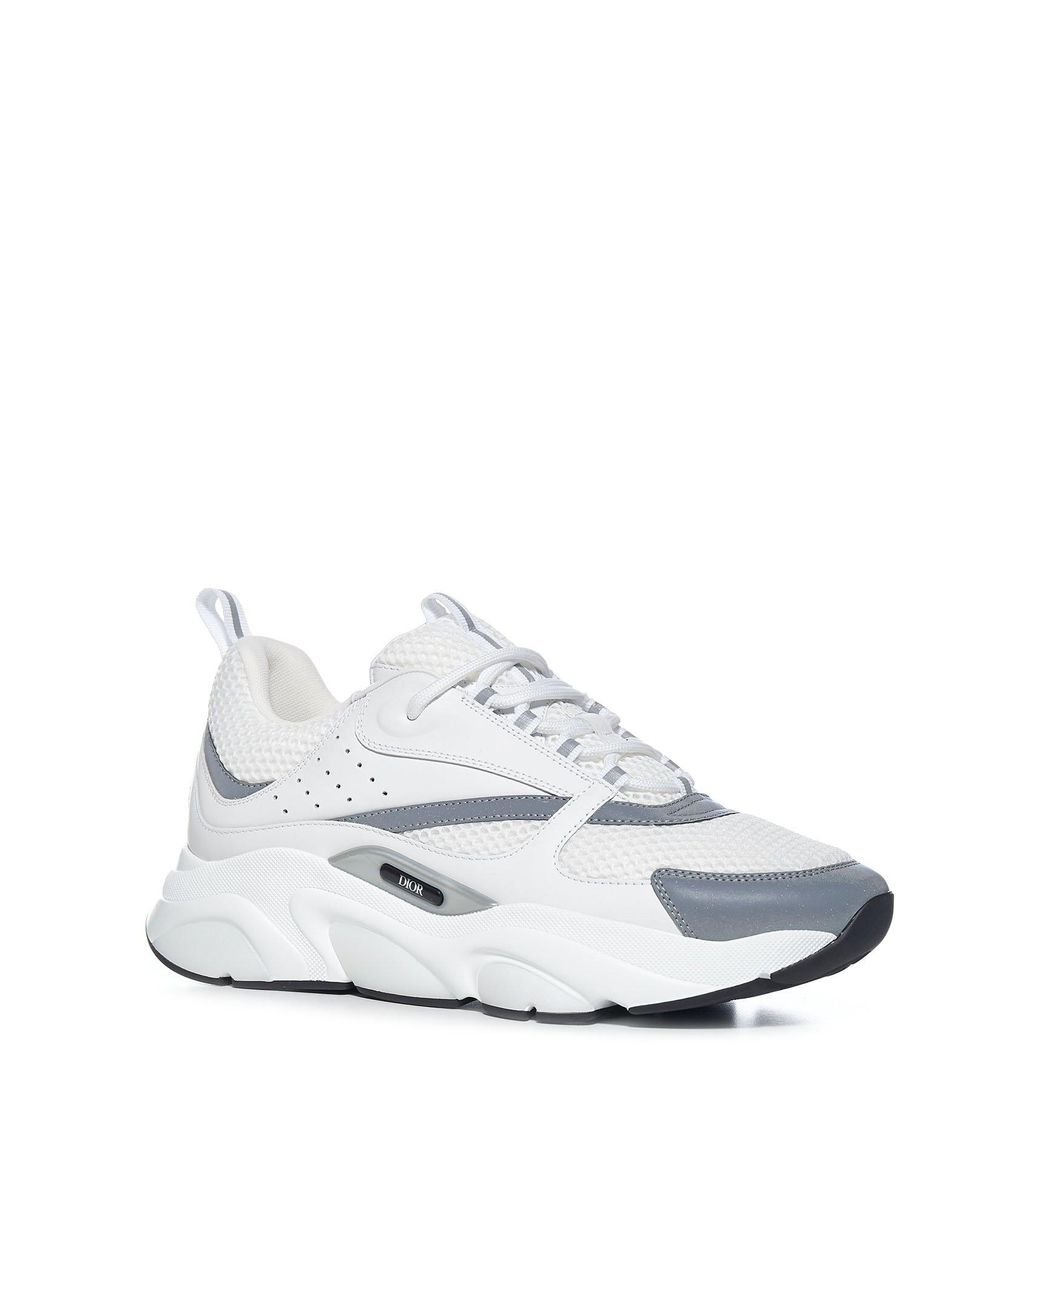 Dior B22 Sneakers in White for Men